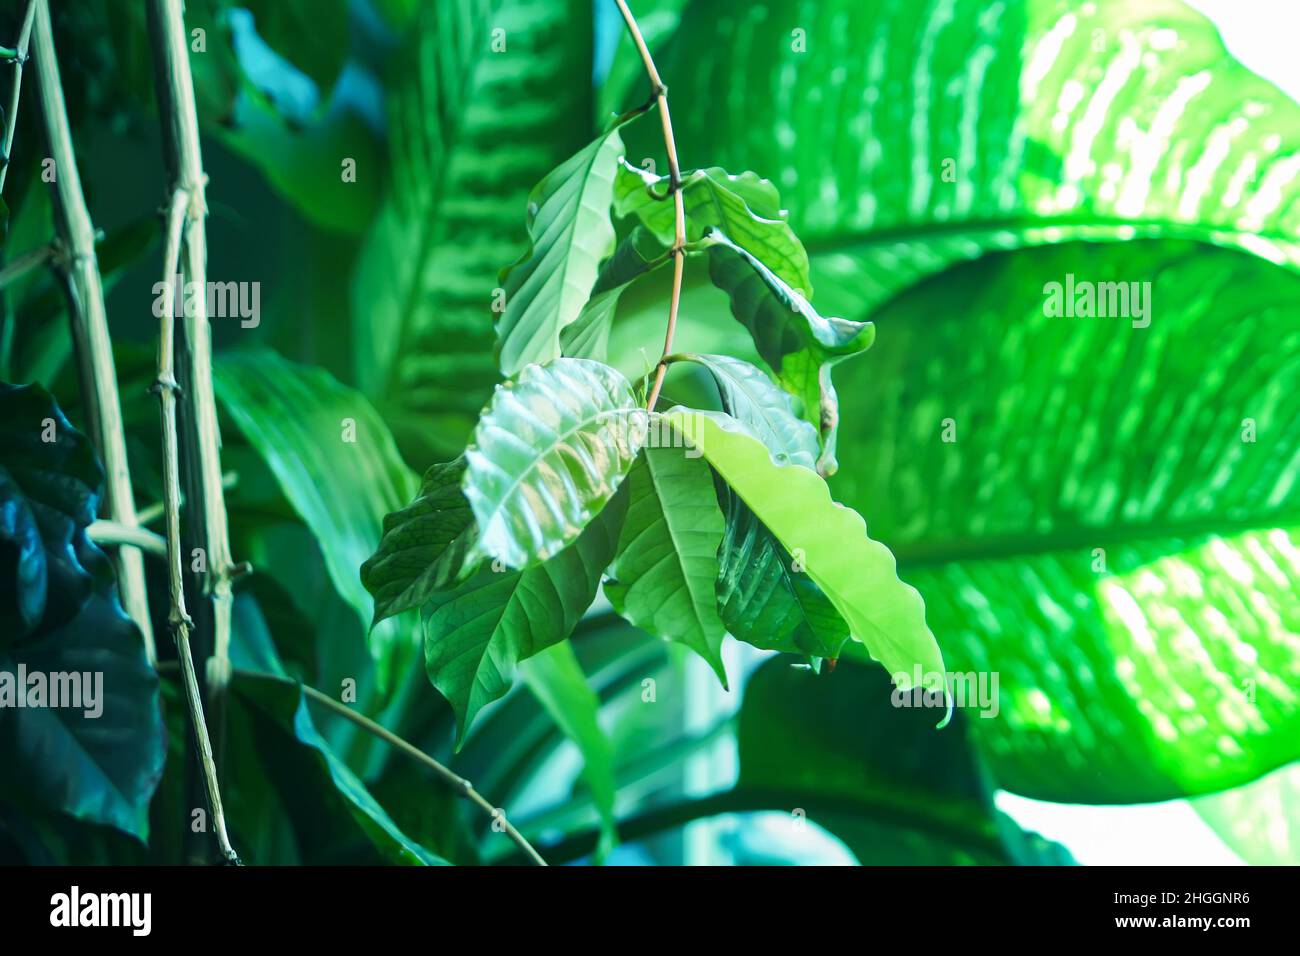 Tropical leaves in sunlight close up. Green foliage nature background. Stock Photo